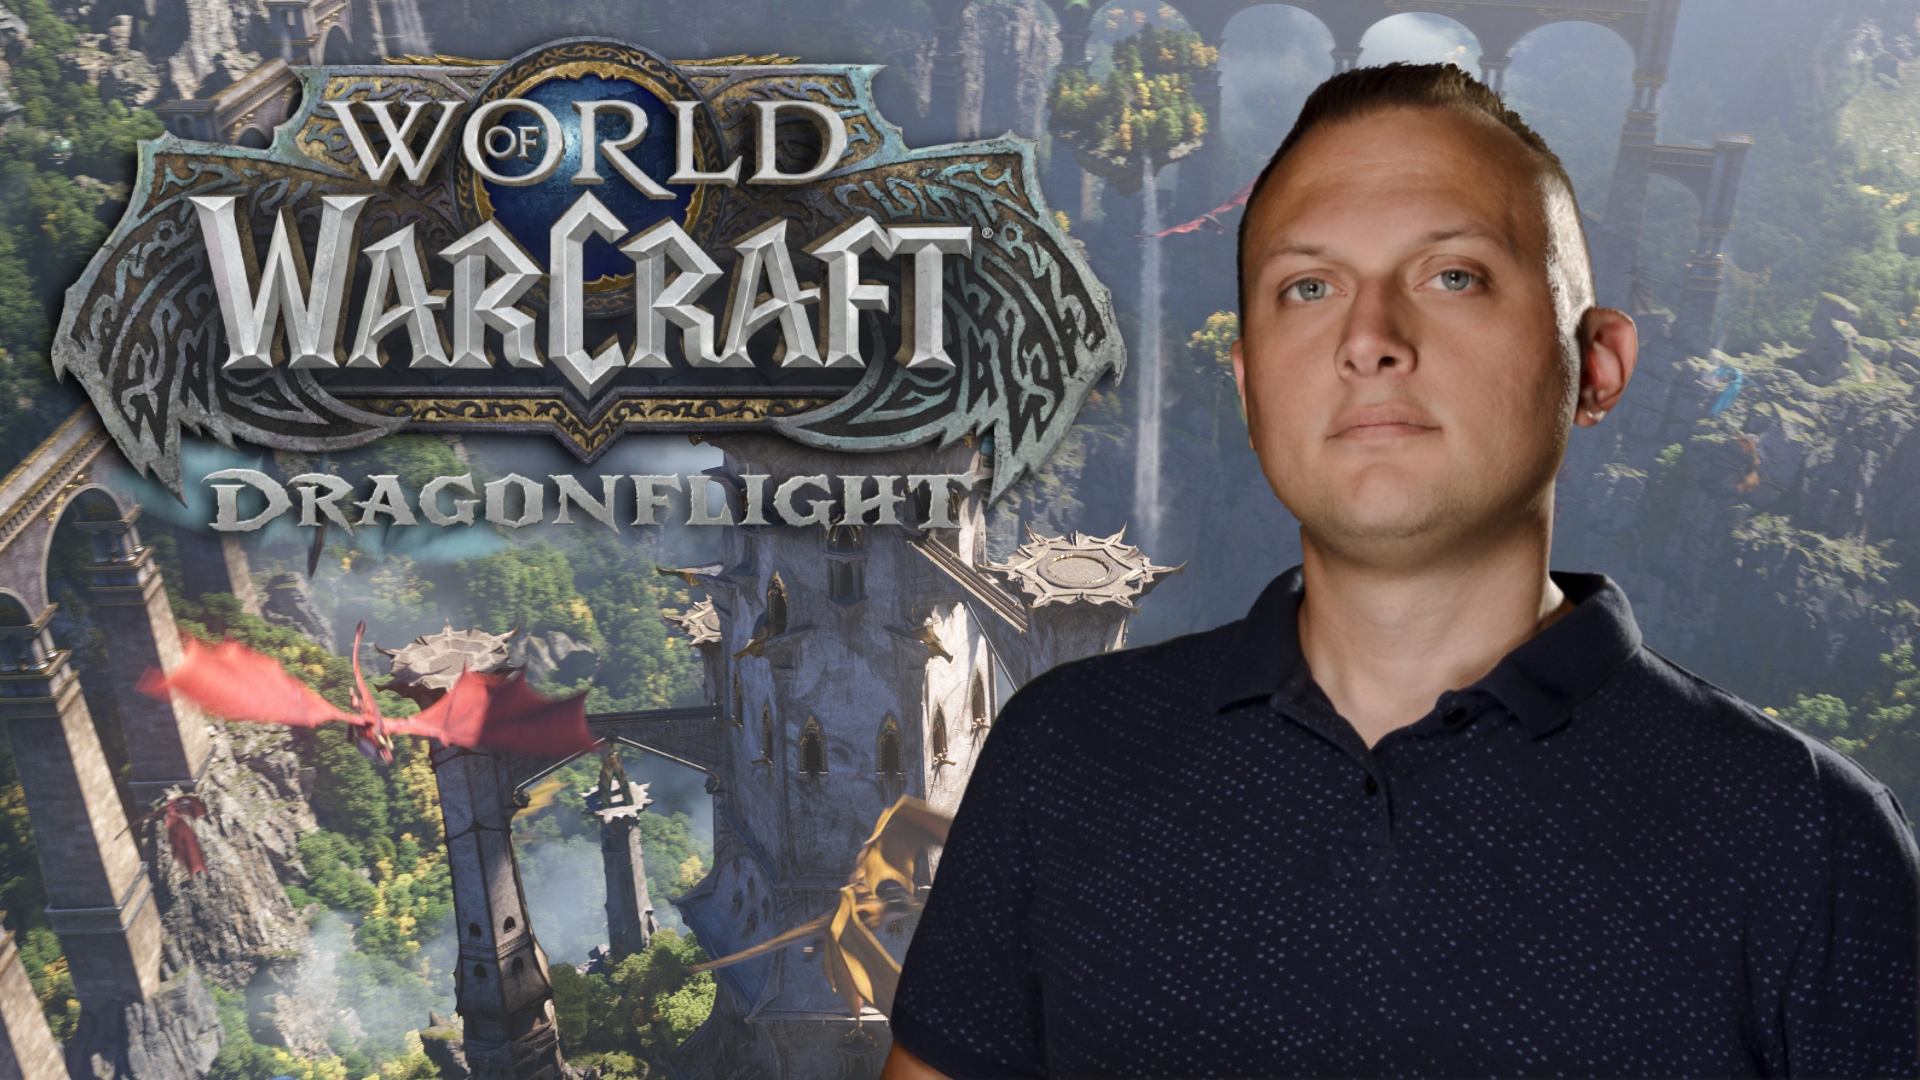 World of Warcraft Game Director Comments on the Possibility of a